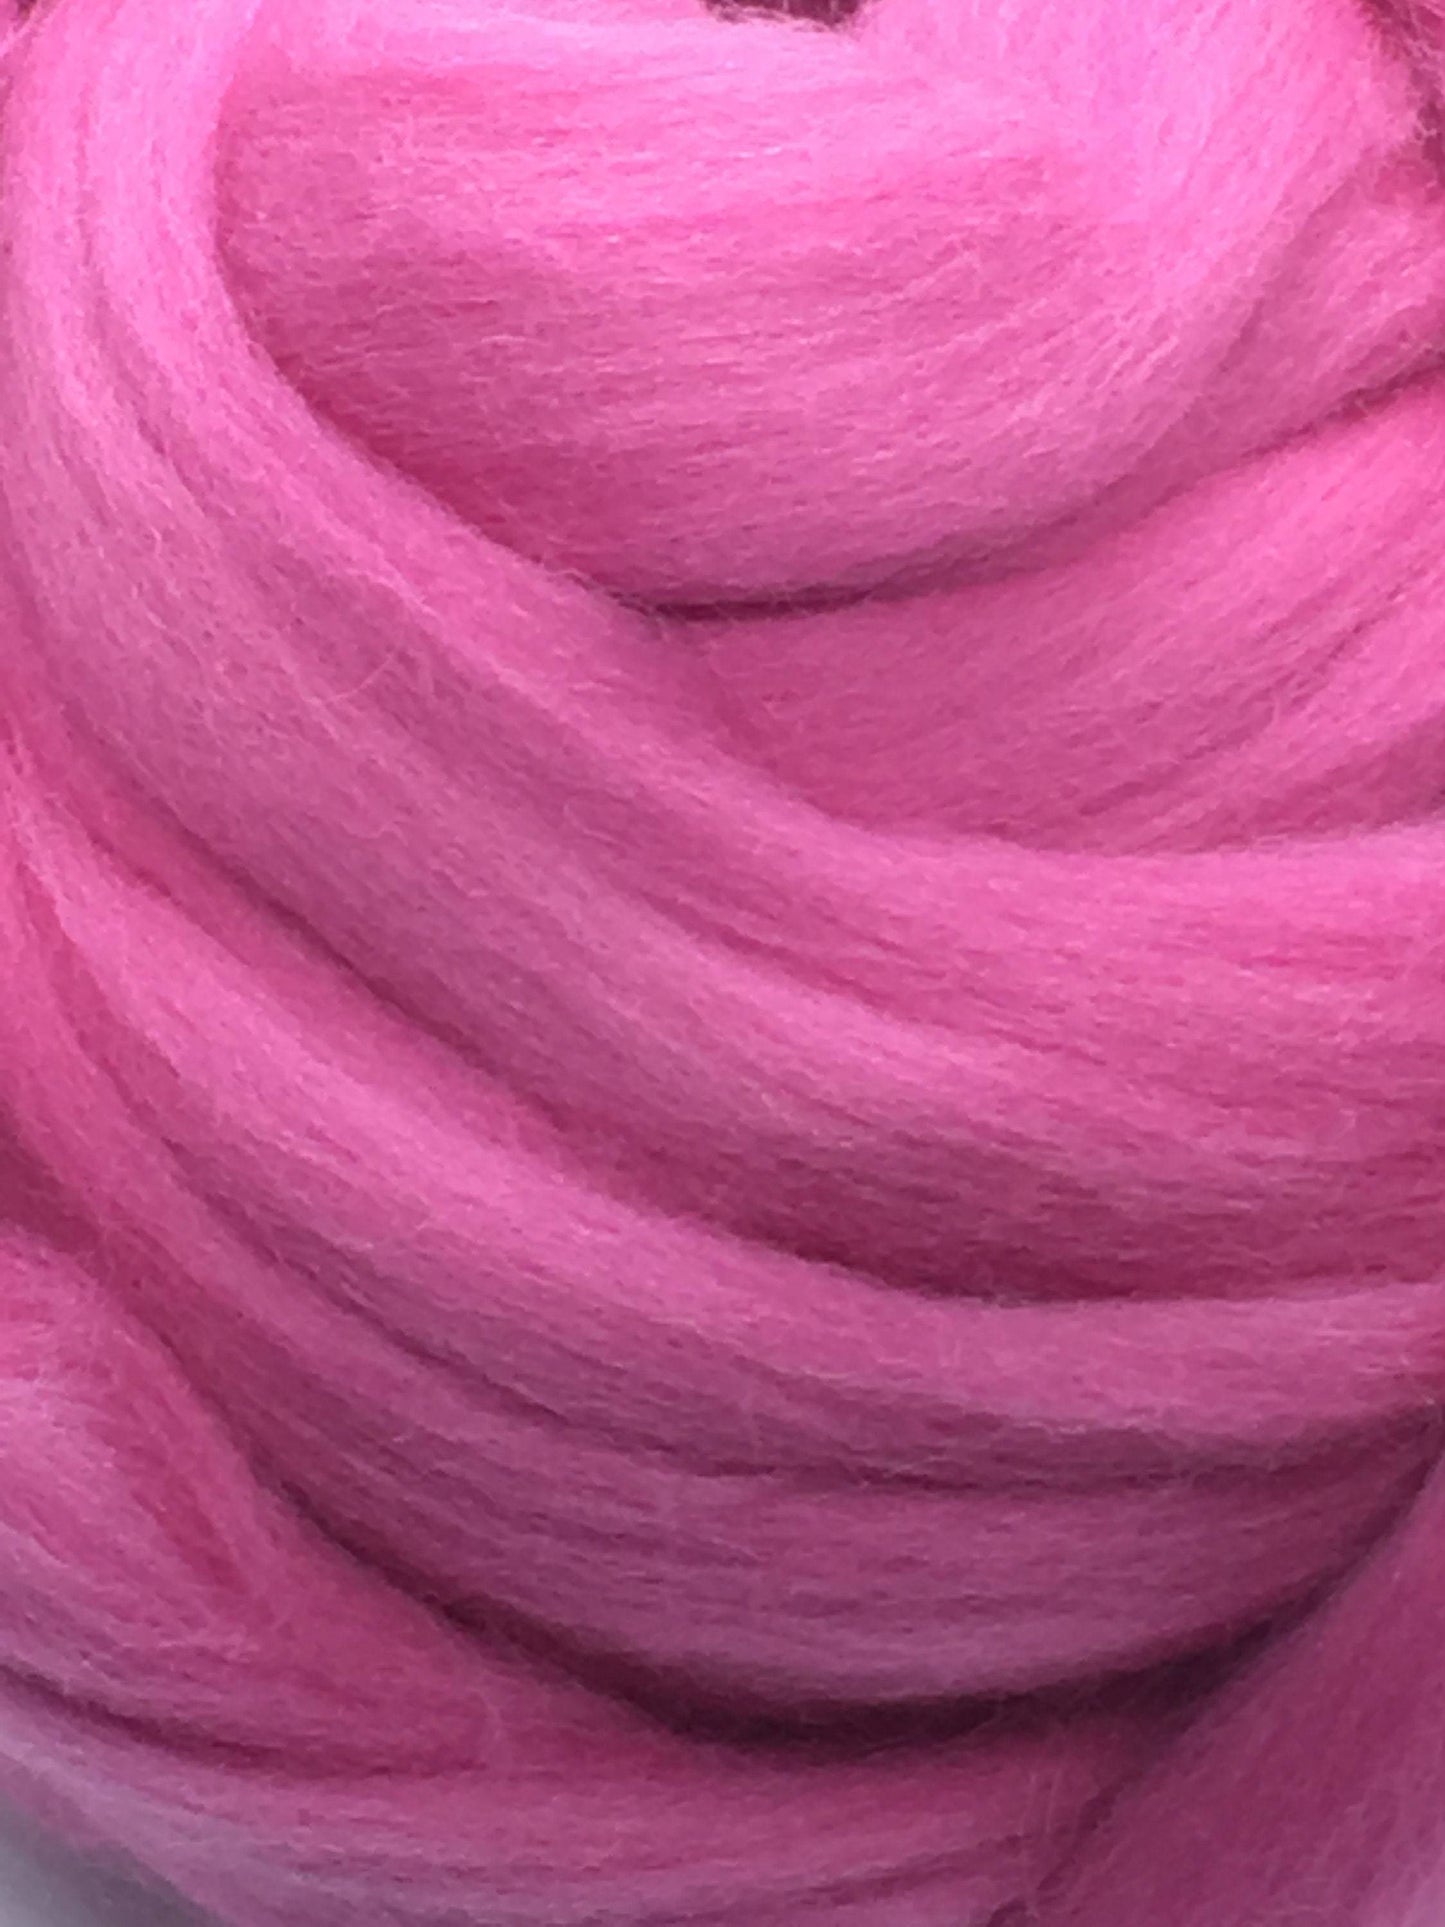 Vibrant Red Pink Ideal for Crafting